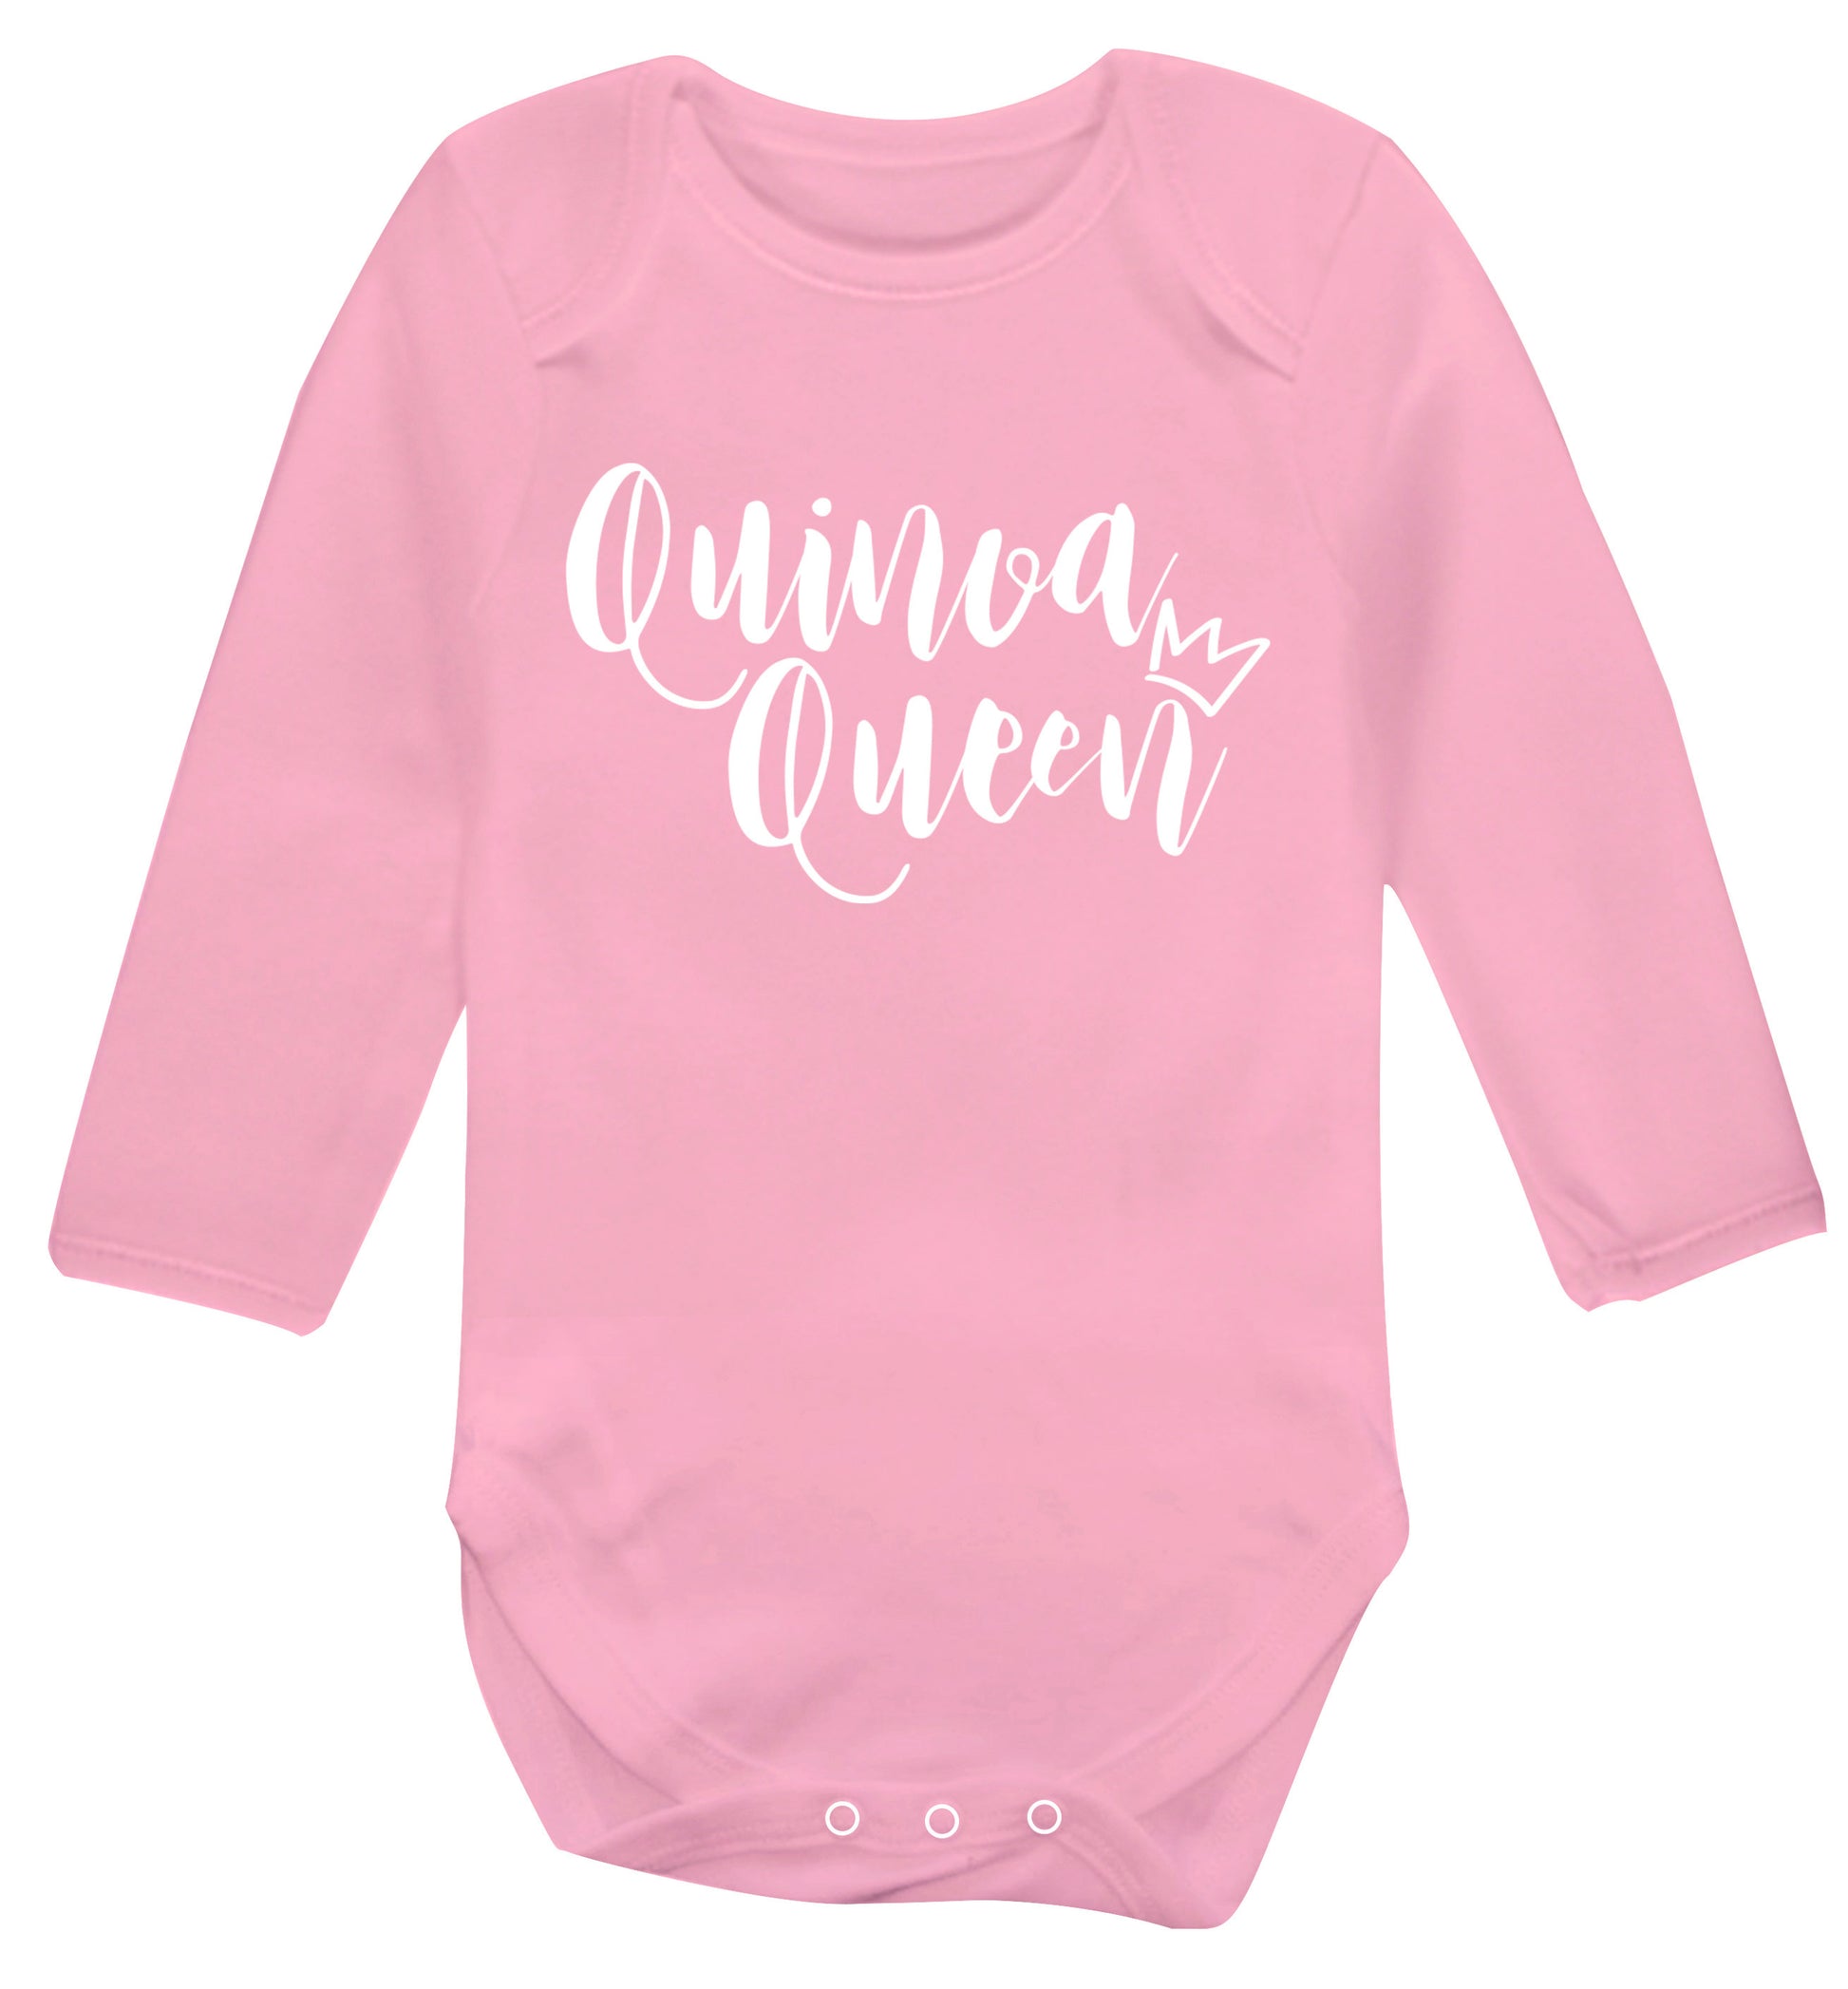 Quinoa Queen Baby Vest long sleeved pale pink 6-12 months